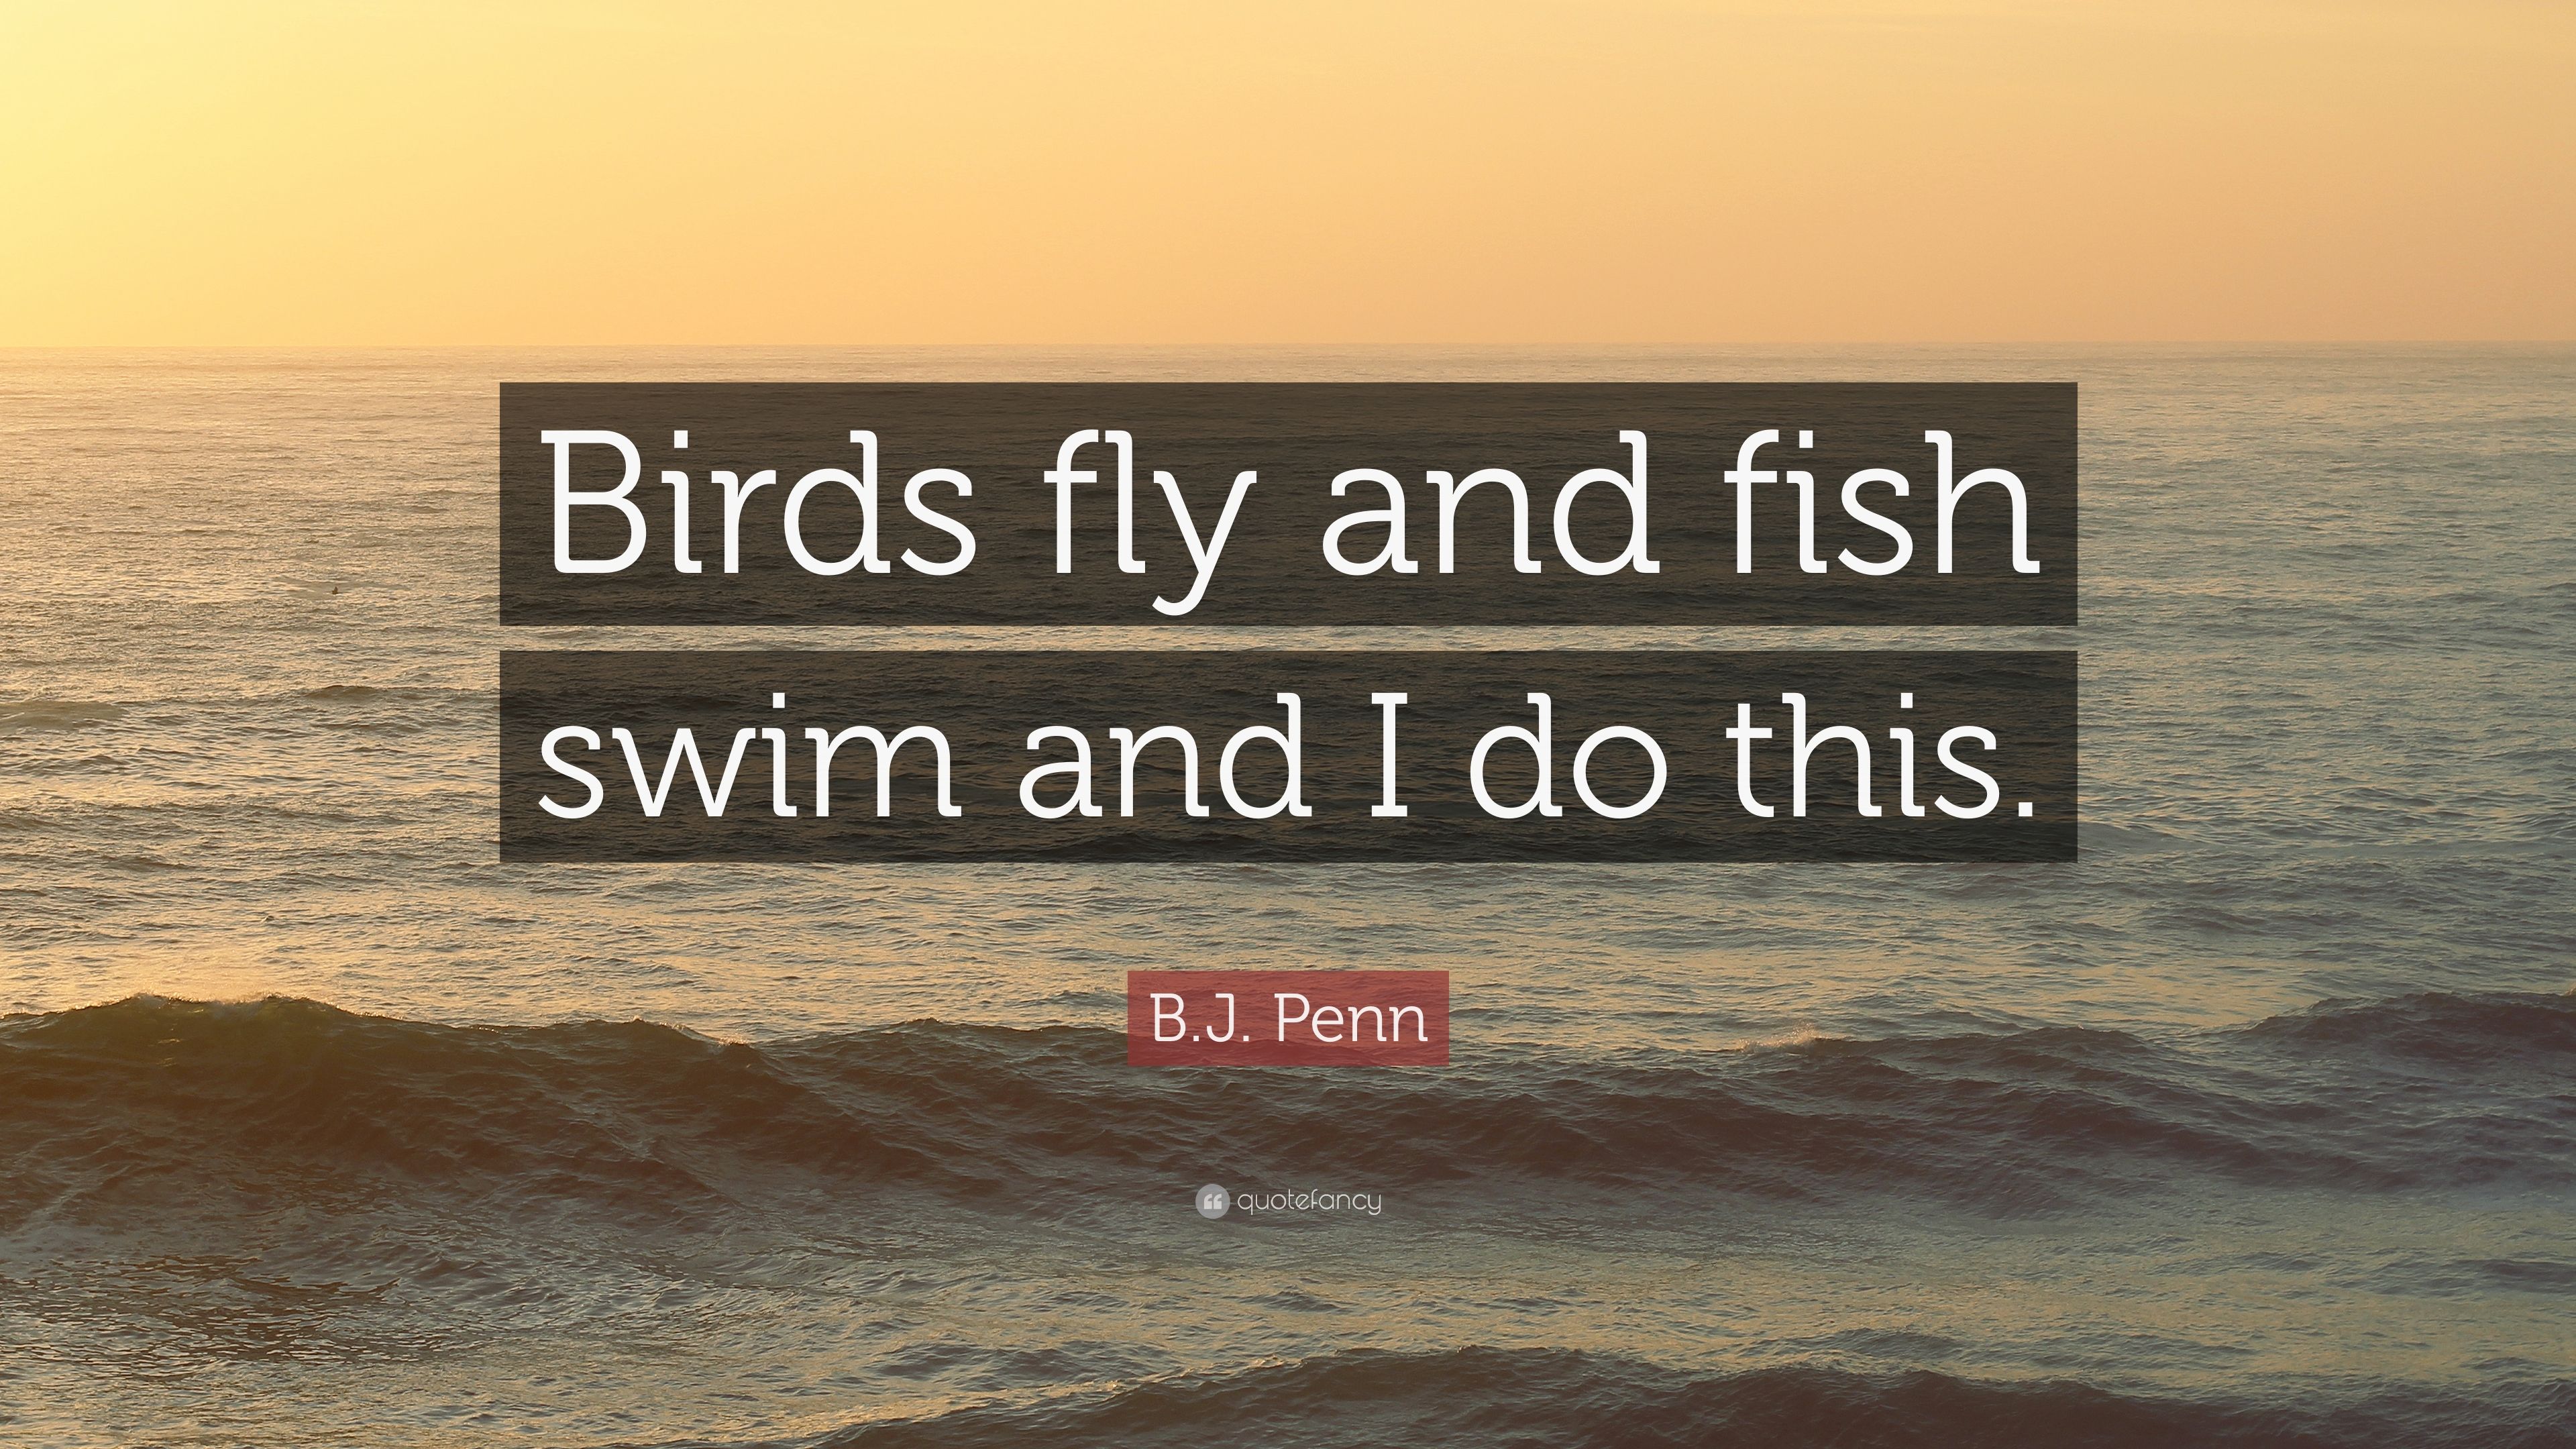 B.J. Penn Quote: “Birds fly and fish swim and I do this.” 7